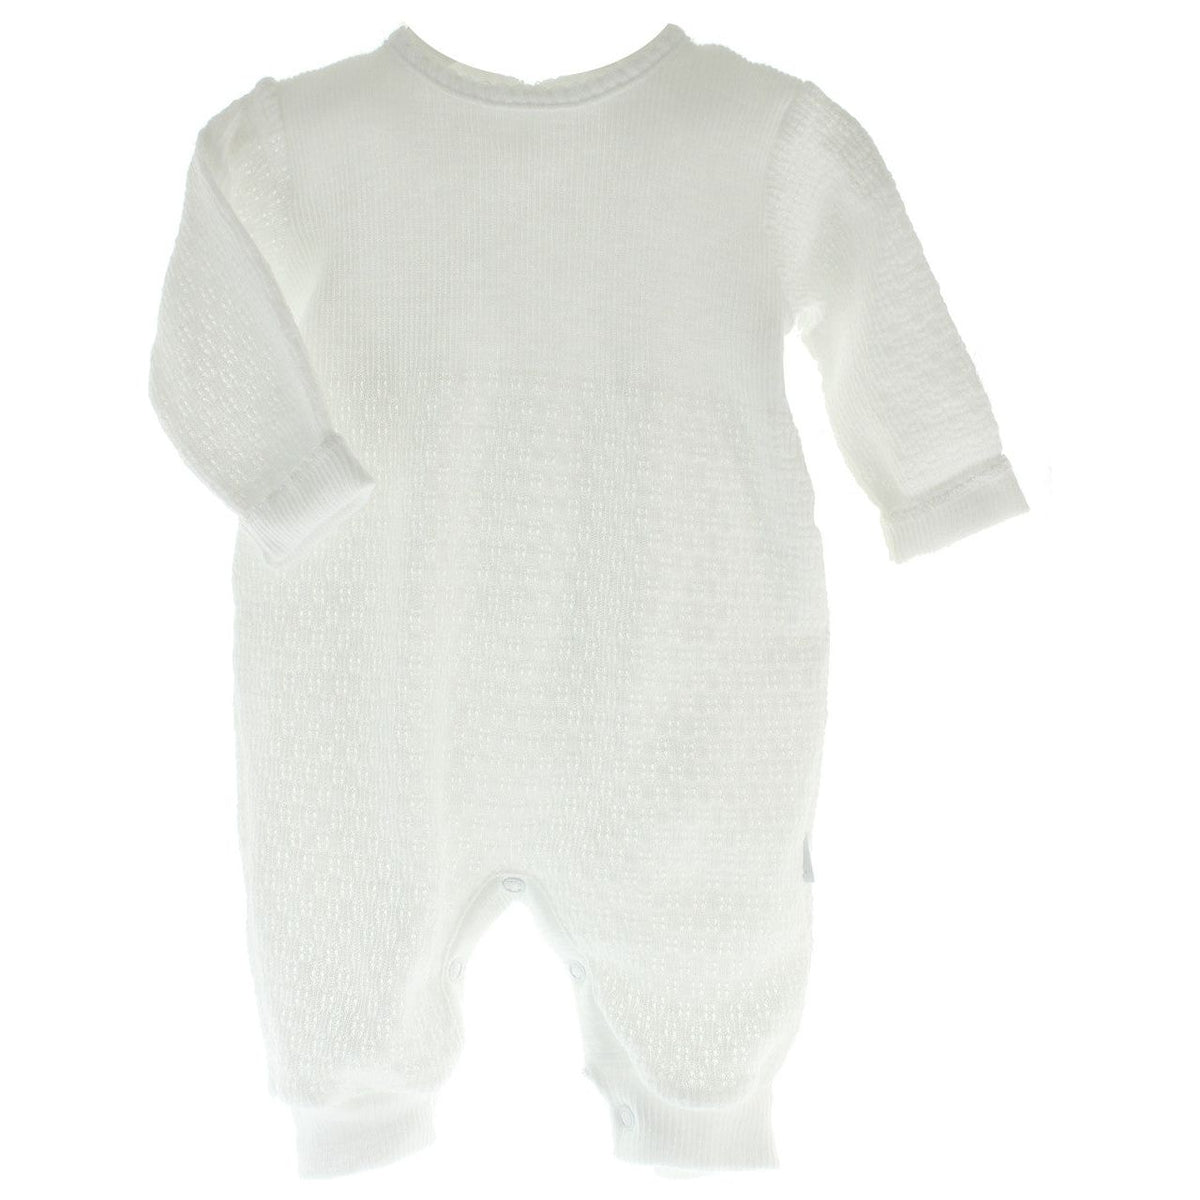 White Unisex Layette Romper Knitted